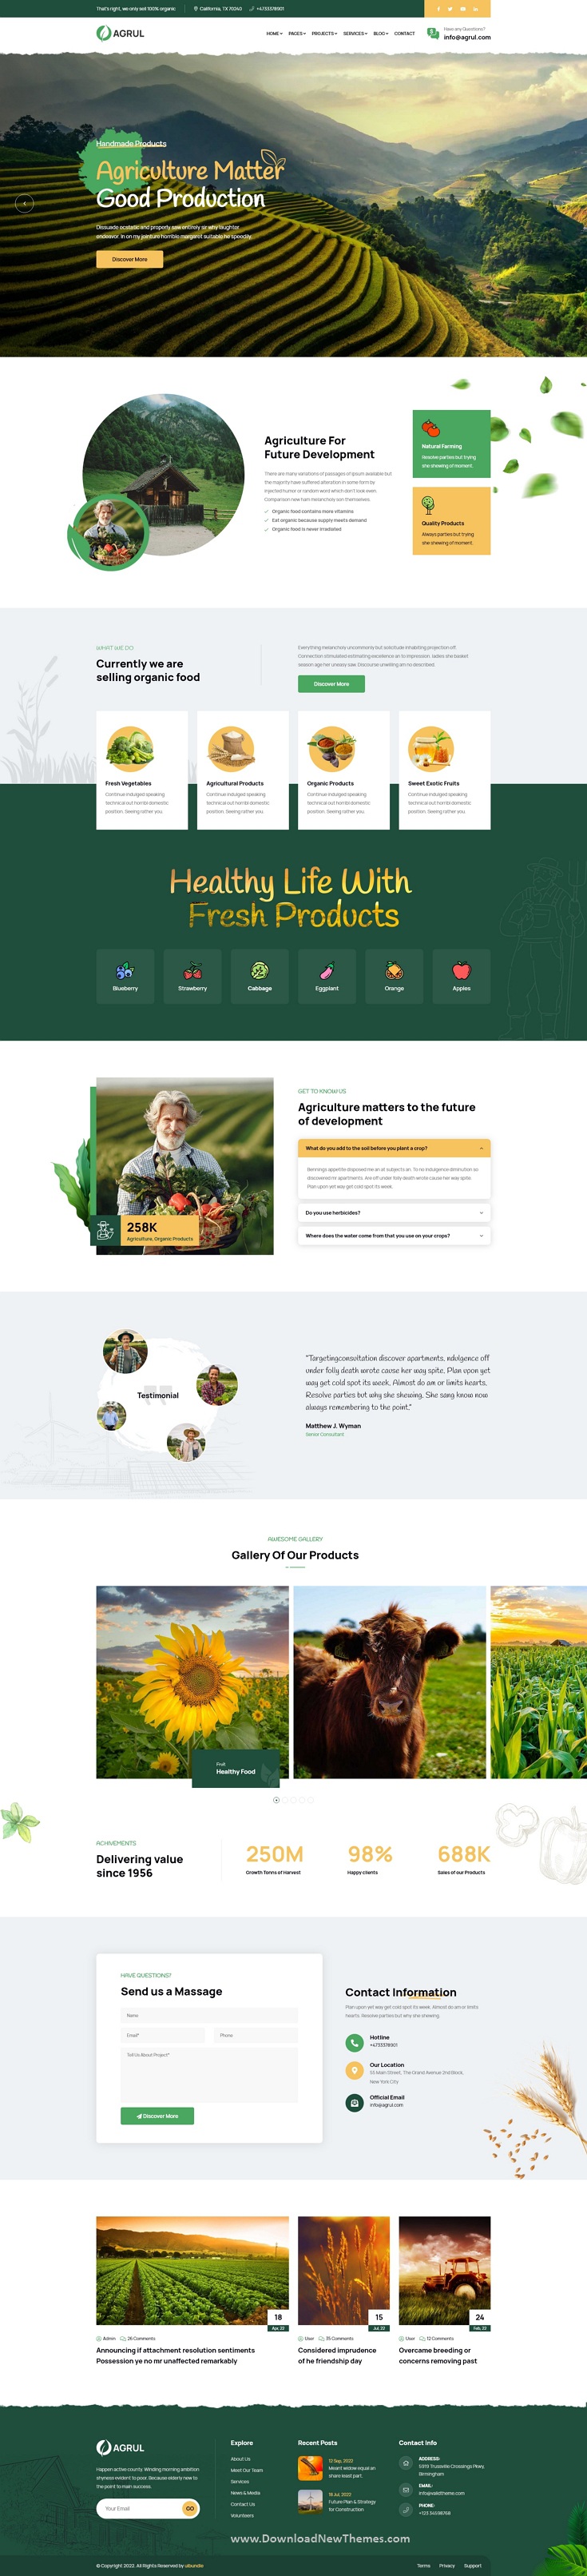 Download Organic Farm Agriculture XD Template